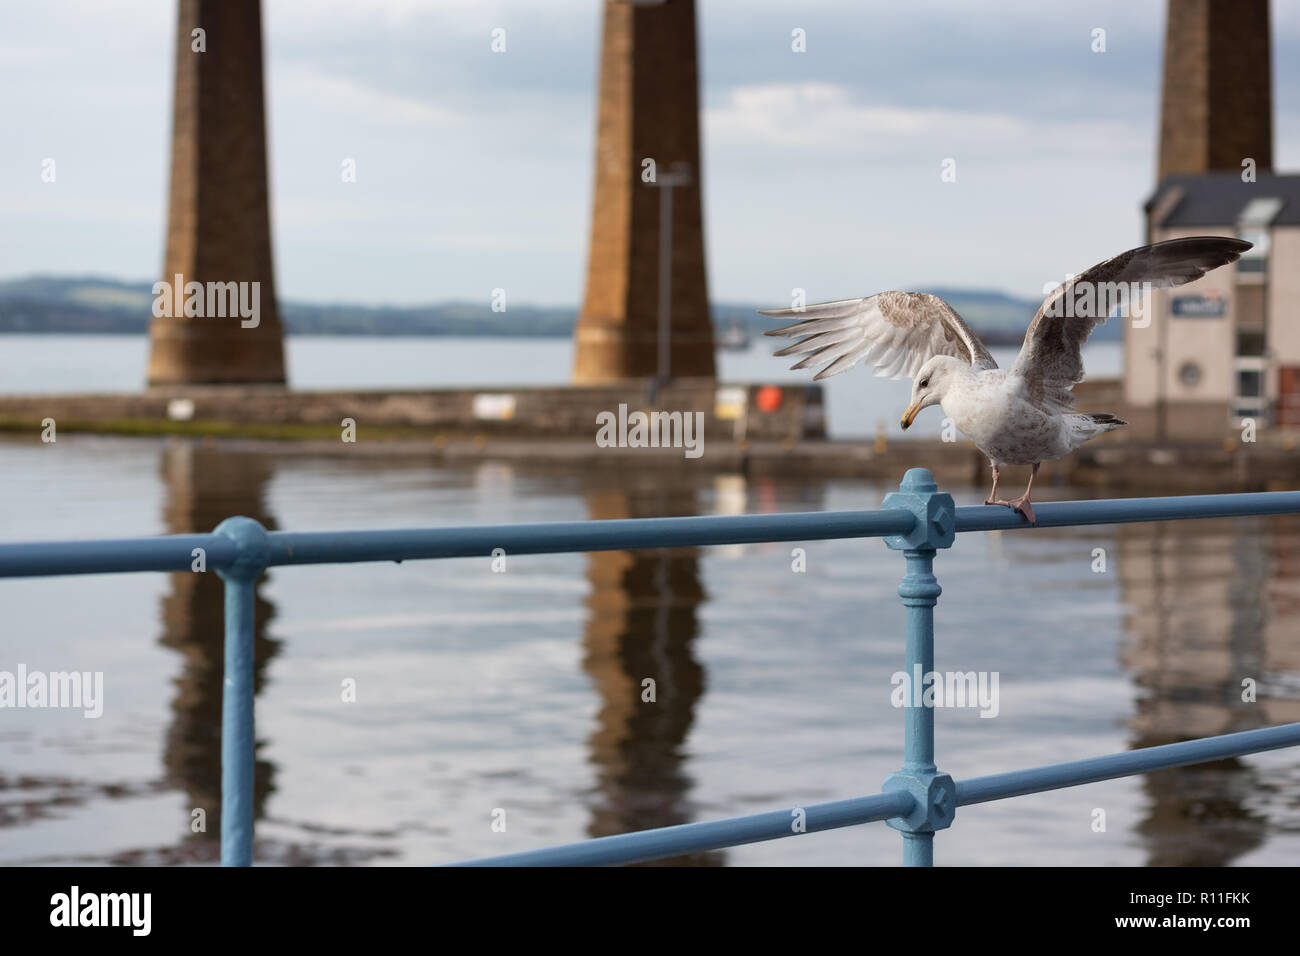 A seagull on a railing in South Queensferry, Scotland with the Forth Rail Bridge in the background Stock Photo